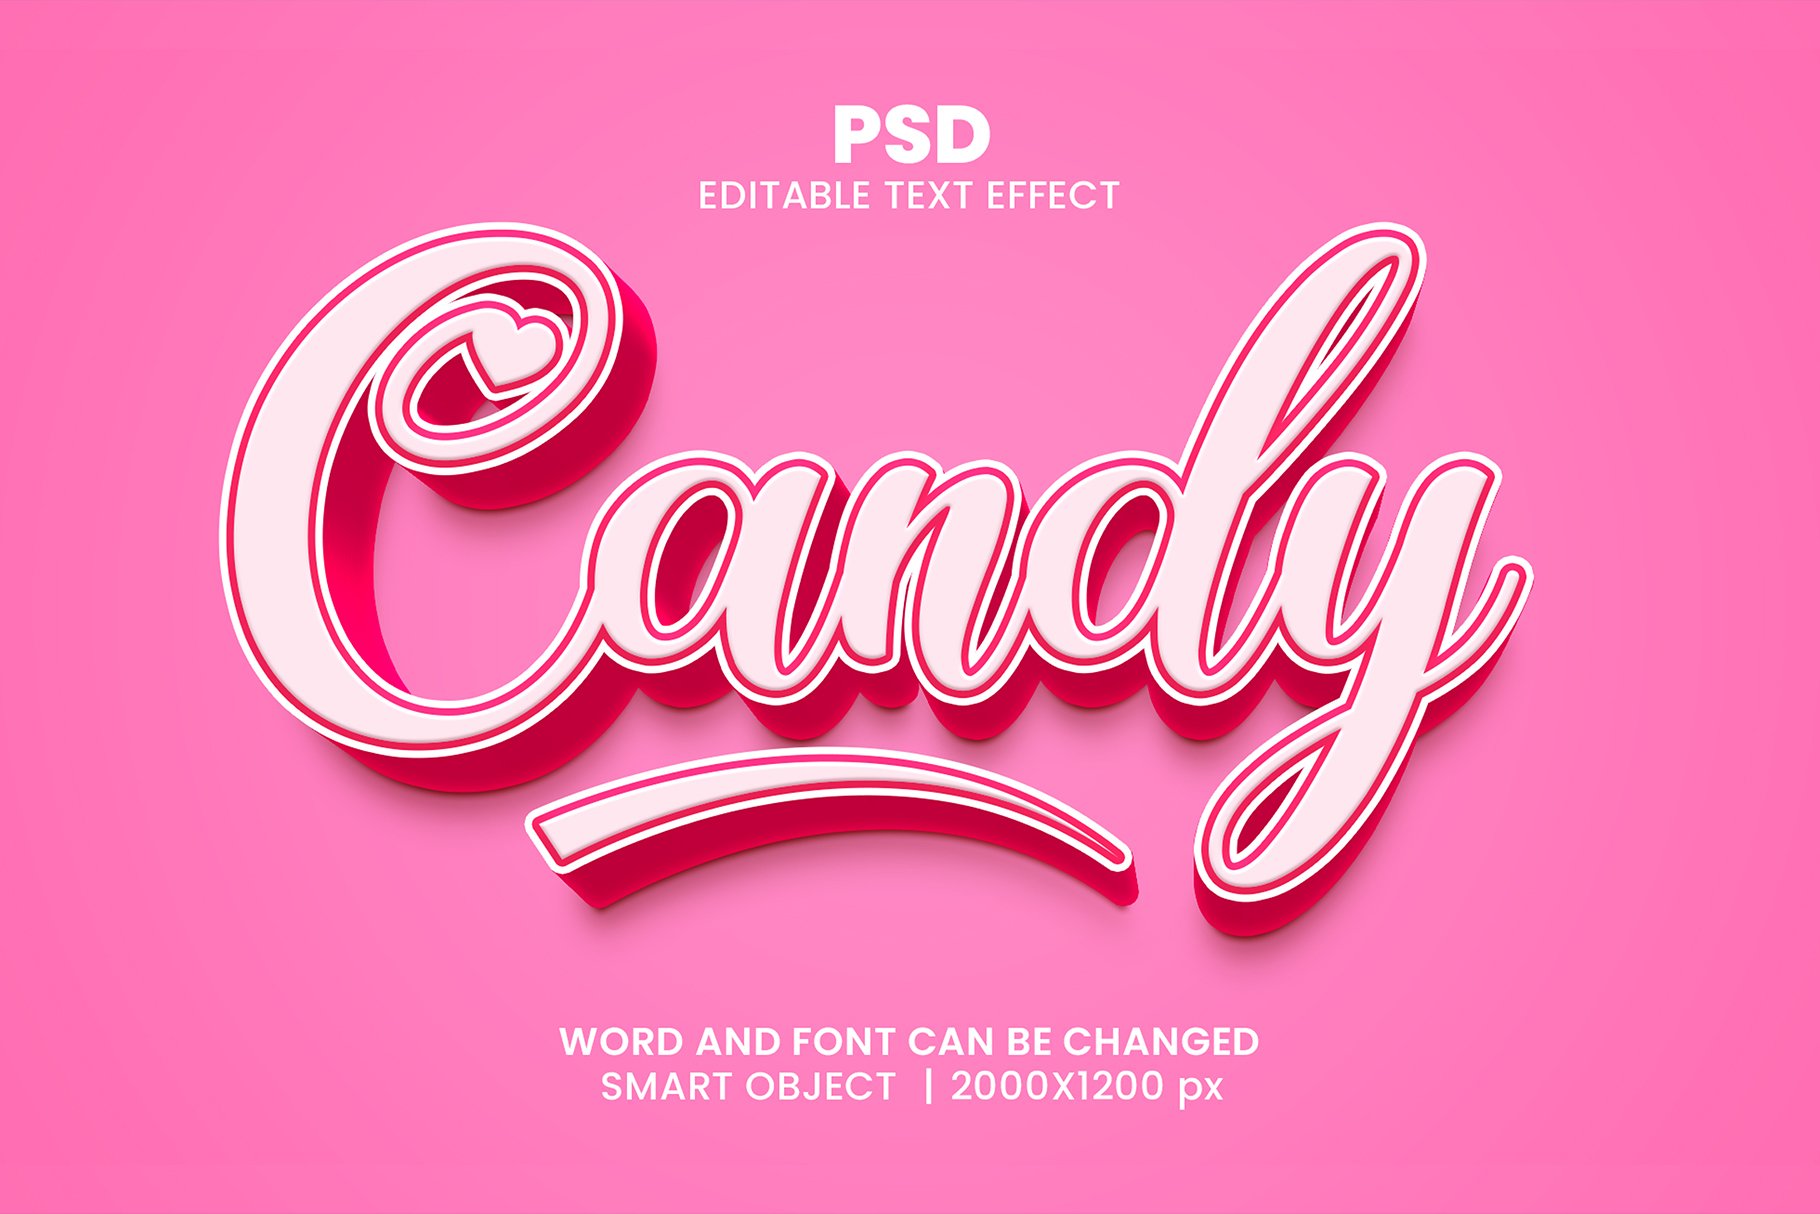 Candy 3d Editable Text Effect Stylecover image.